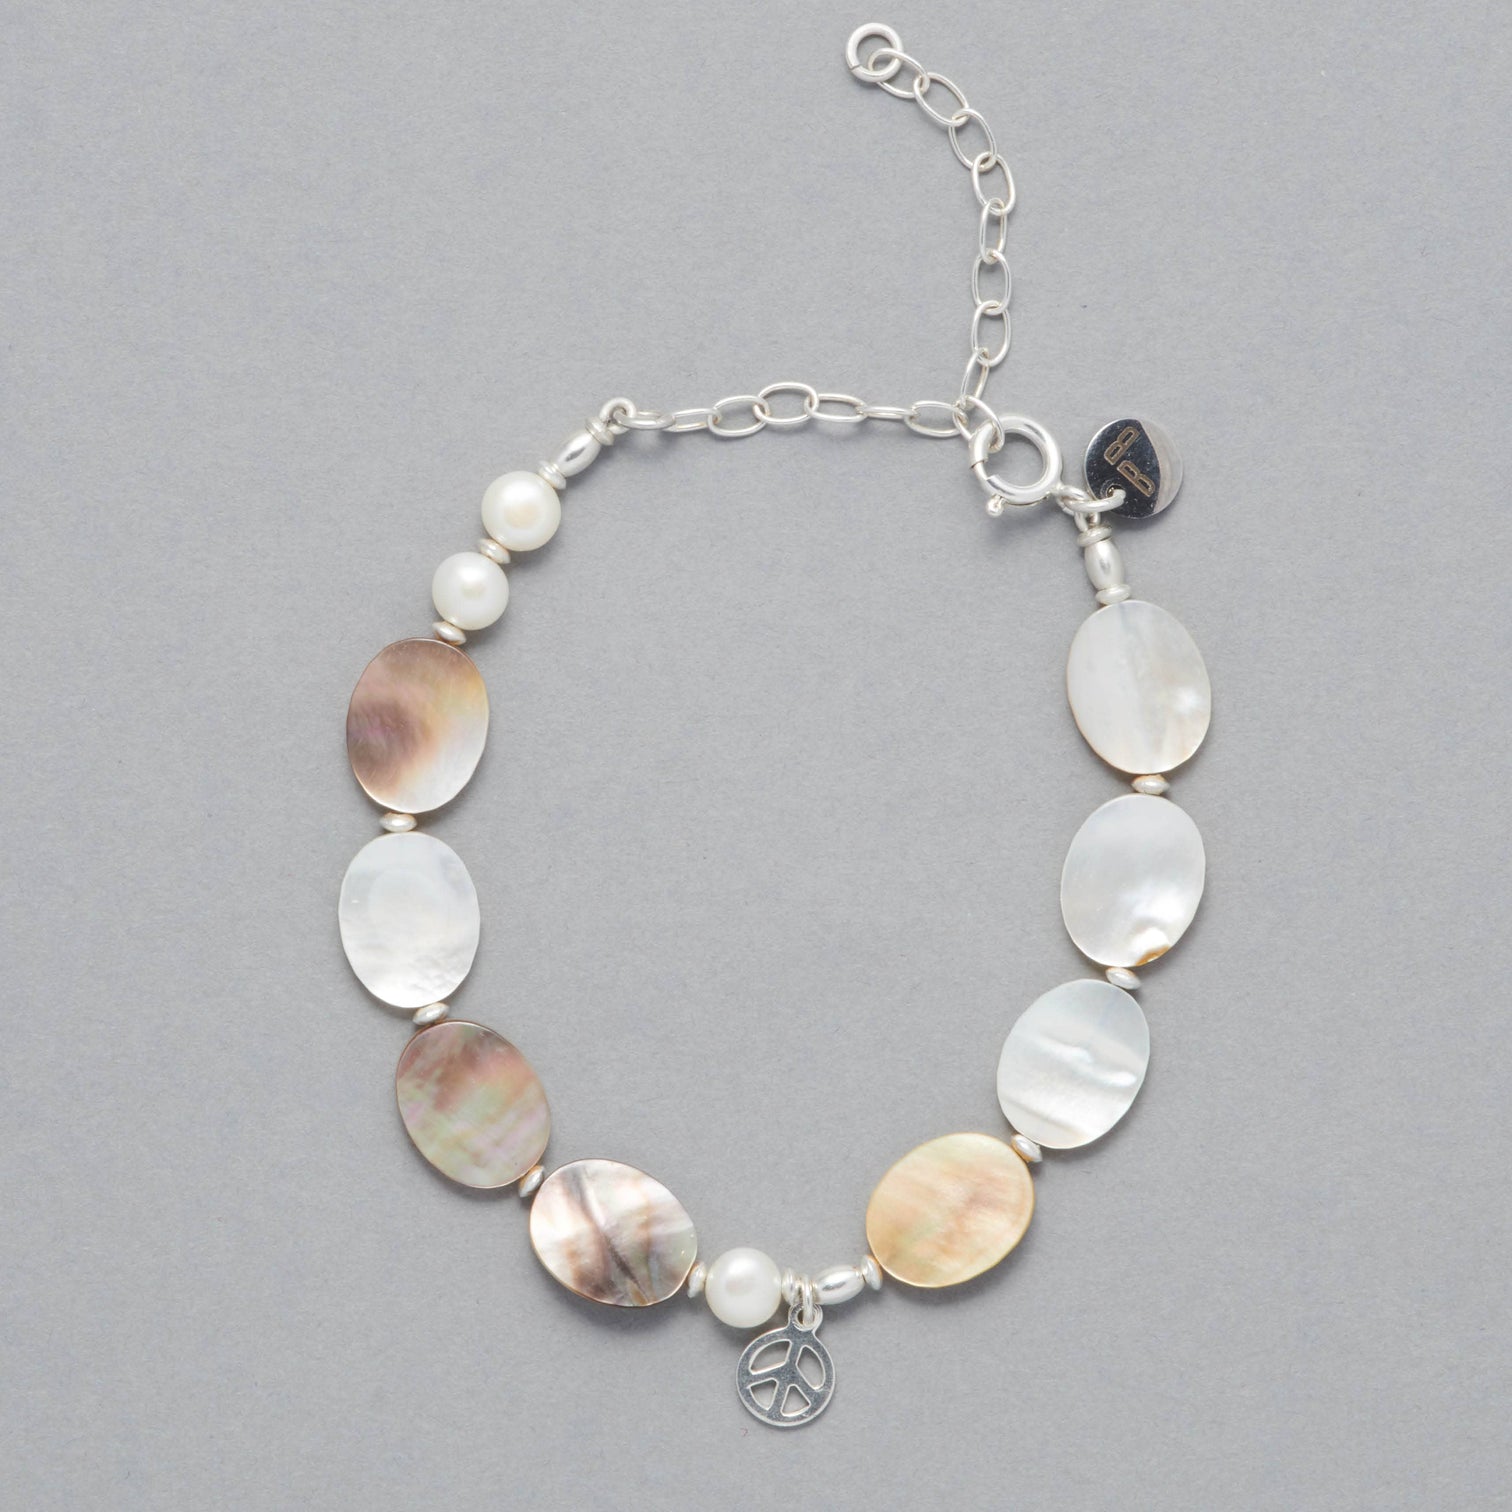 Product shot of the Marilla Anklet made with Mother of Pearl, Freshwater White Pearls, Sterling Silver elements and a Sterling Silver Peace Symbol Charm. A little silver chain allows the adjusting of the size. 